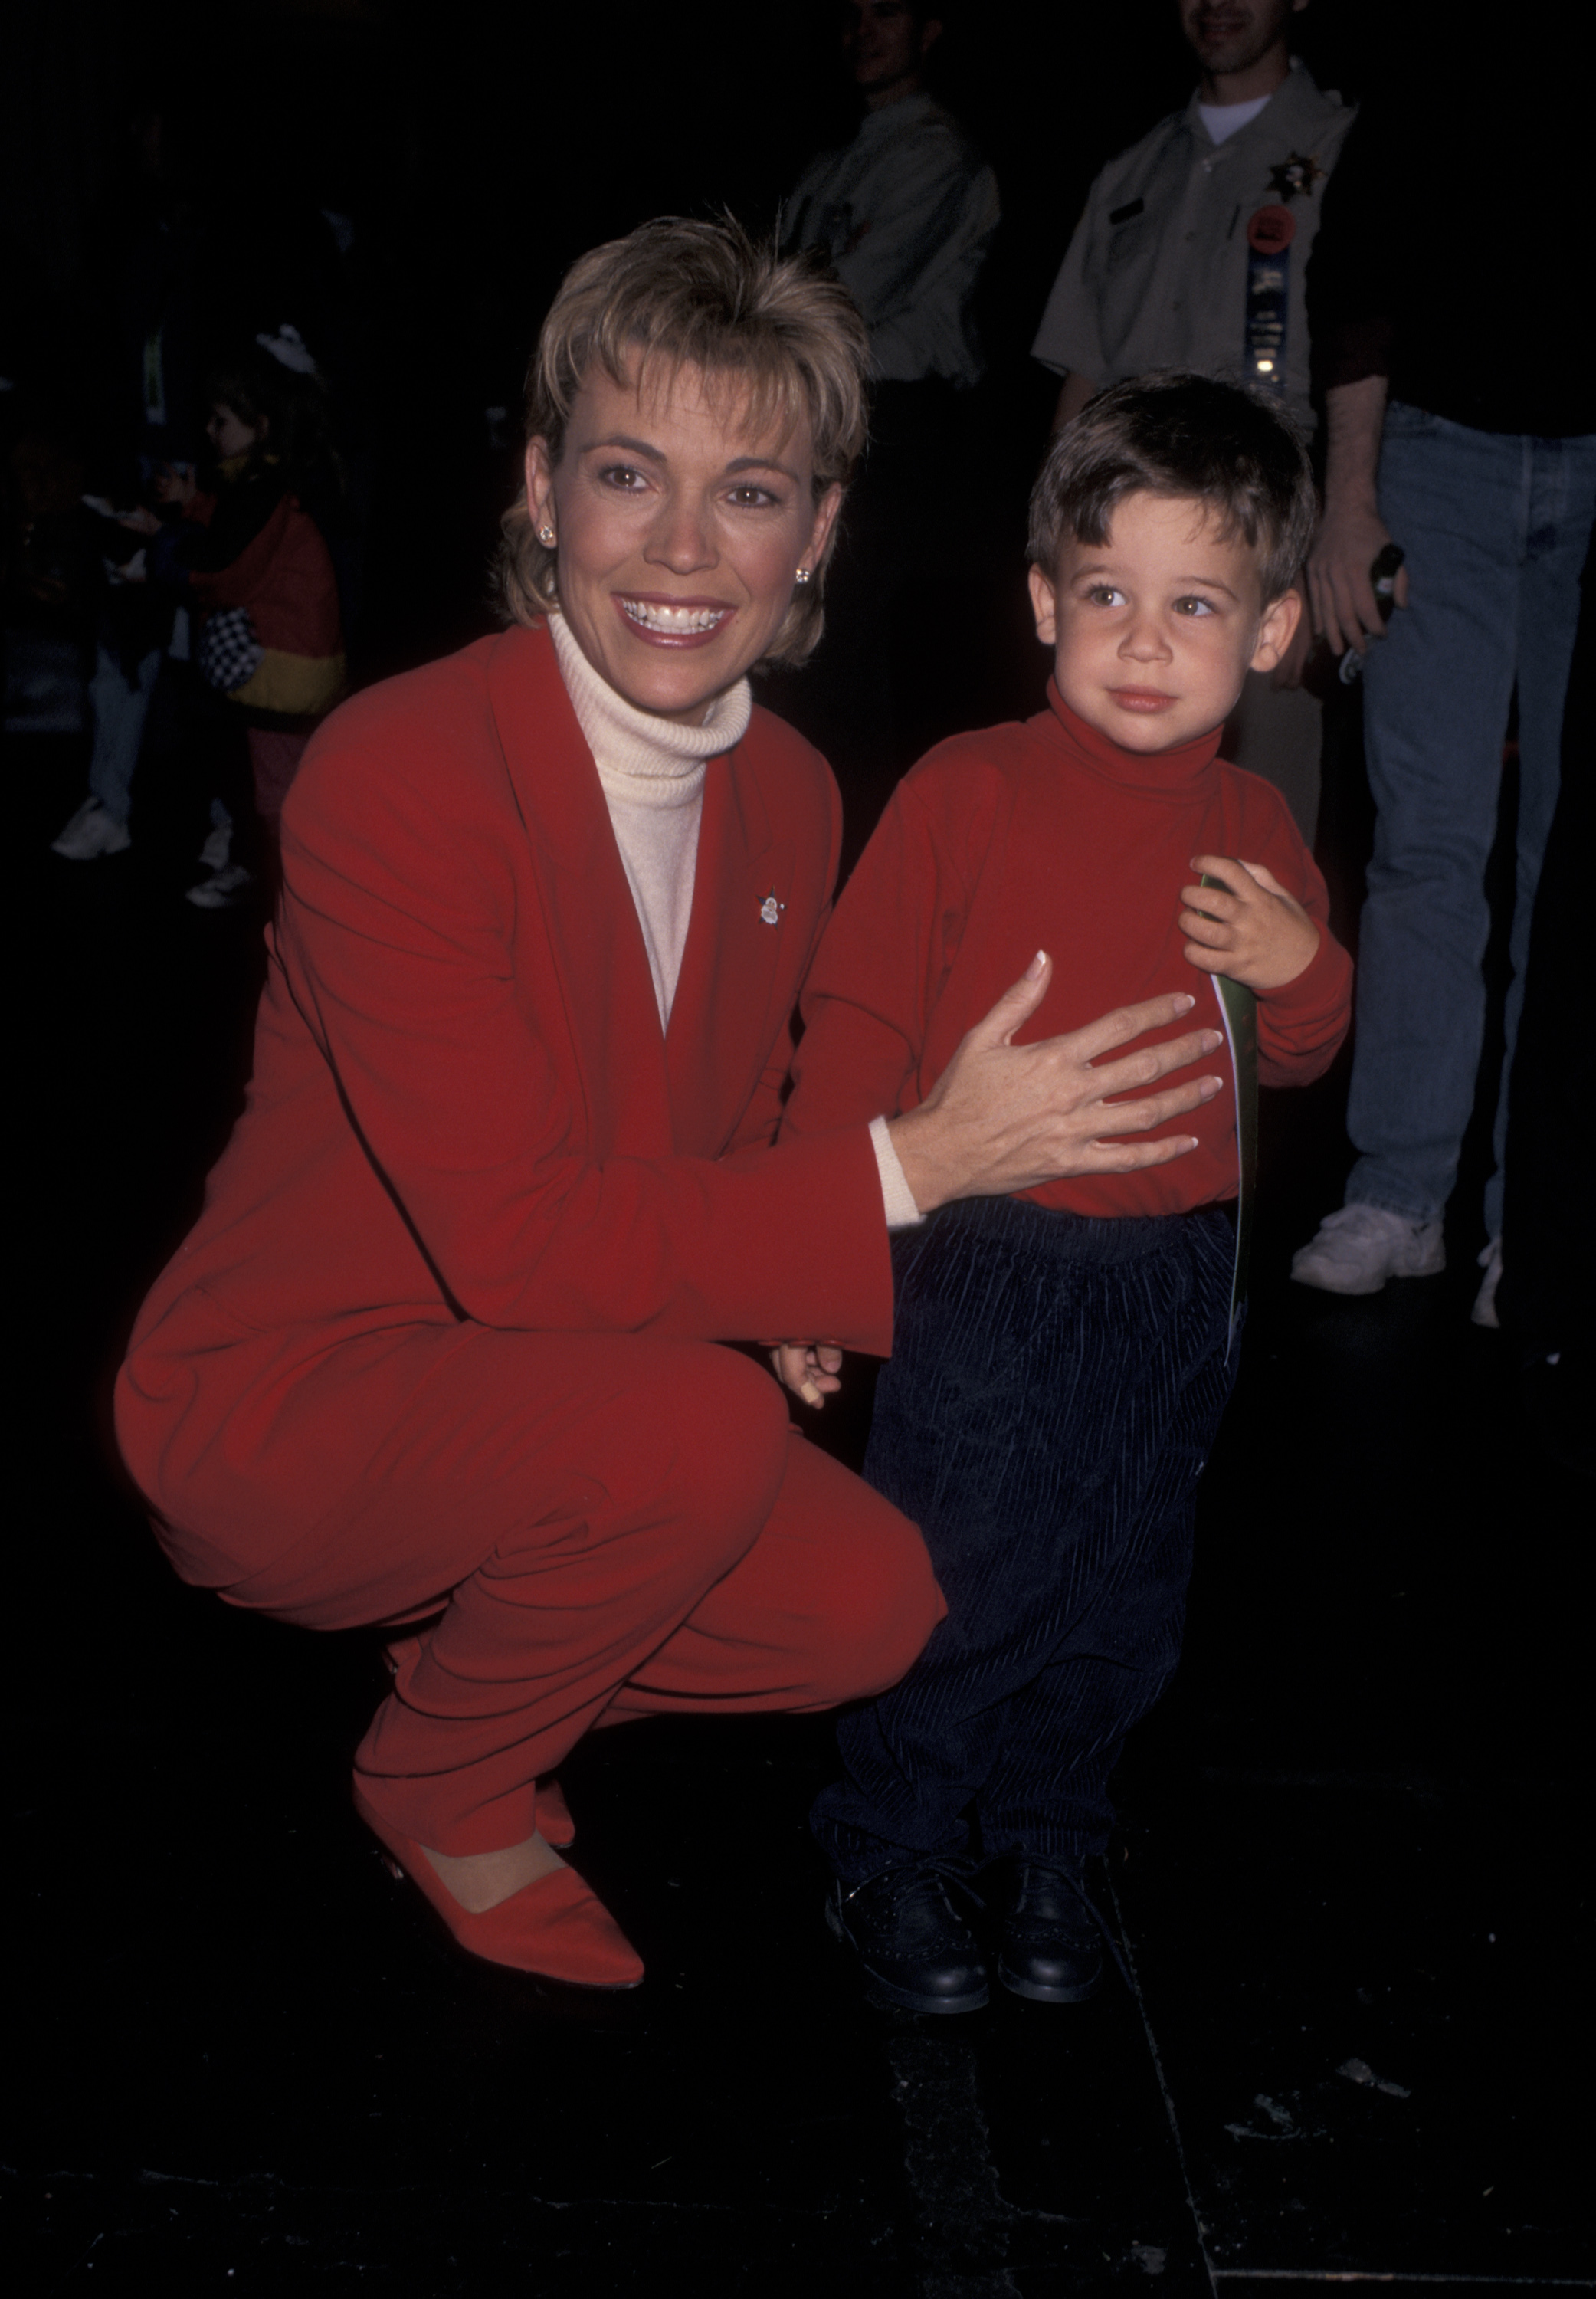 Vanna White and Nikko Santo Pietro at the 65th Annual Hollywood Christmas Parade in Hollywood, California on December 1, 1996 | Source: Getty Images